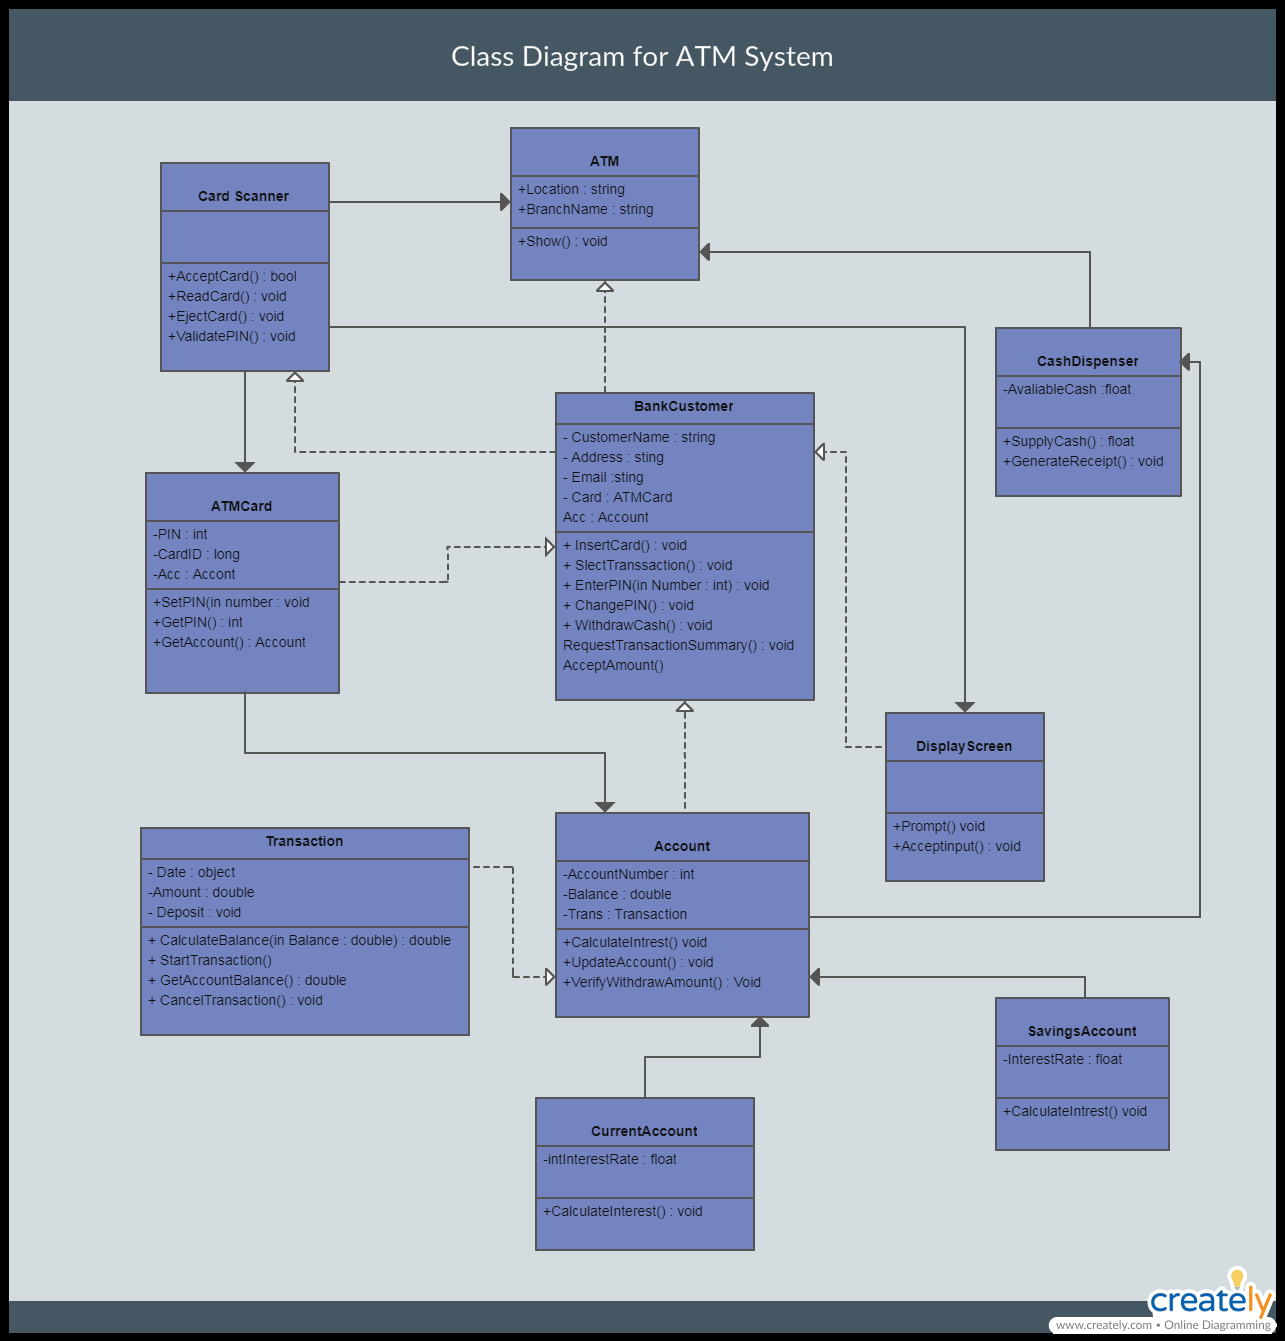 Class Diagram Example The Ultimate Class Diagram Tutorial To Help Model Your Systems Easily